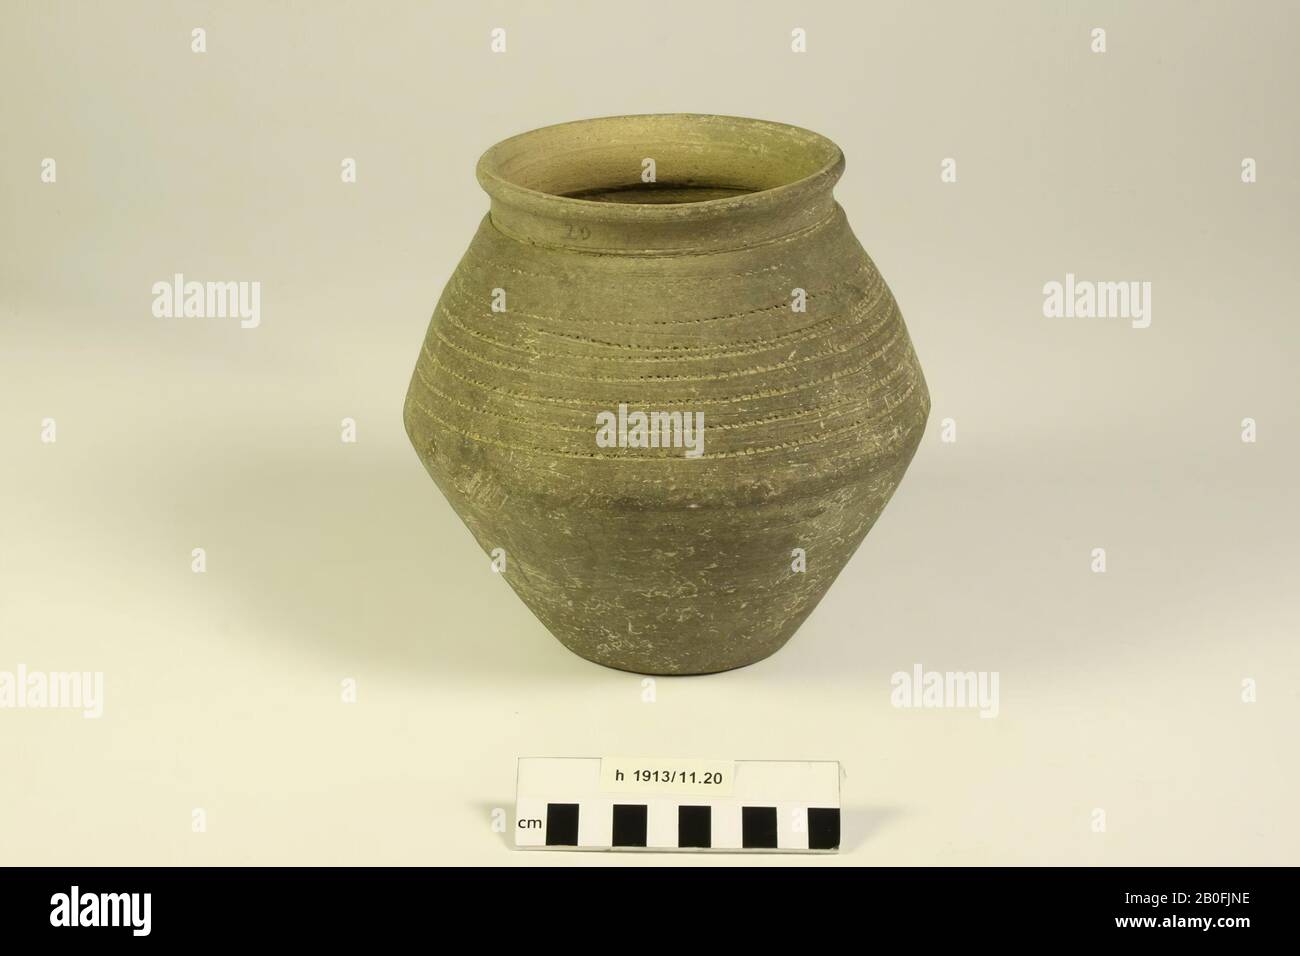 Knikpot with radstempelovering. Contains cremated residues., Kink pot, earthenware (Frankish), h: 17.7 cm, diam: 18 cm, vmeb 600-700, Netherlands, South Holland, Katwijk, Rijnsburg, cemetery Stock Photo